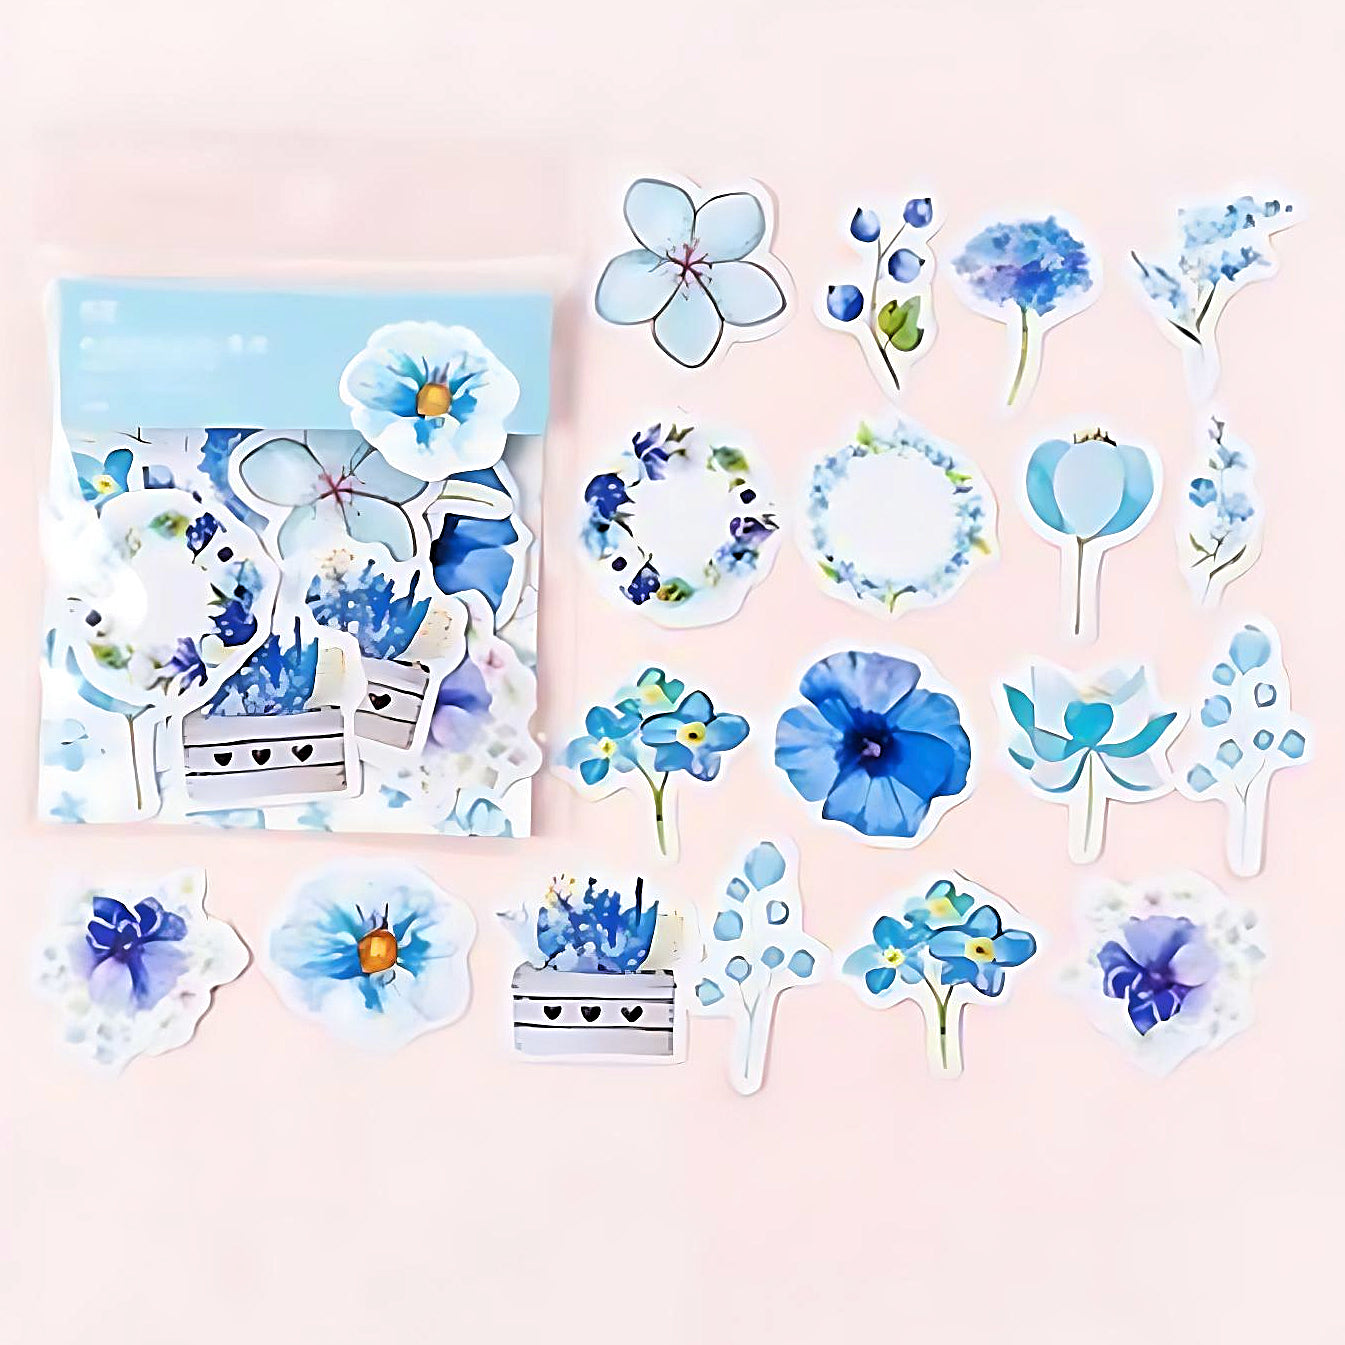 a set of bright flower stickers in blue color